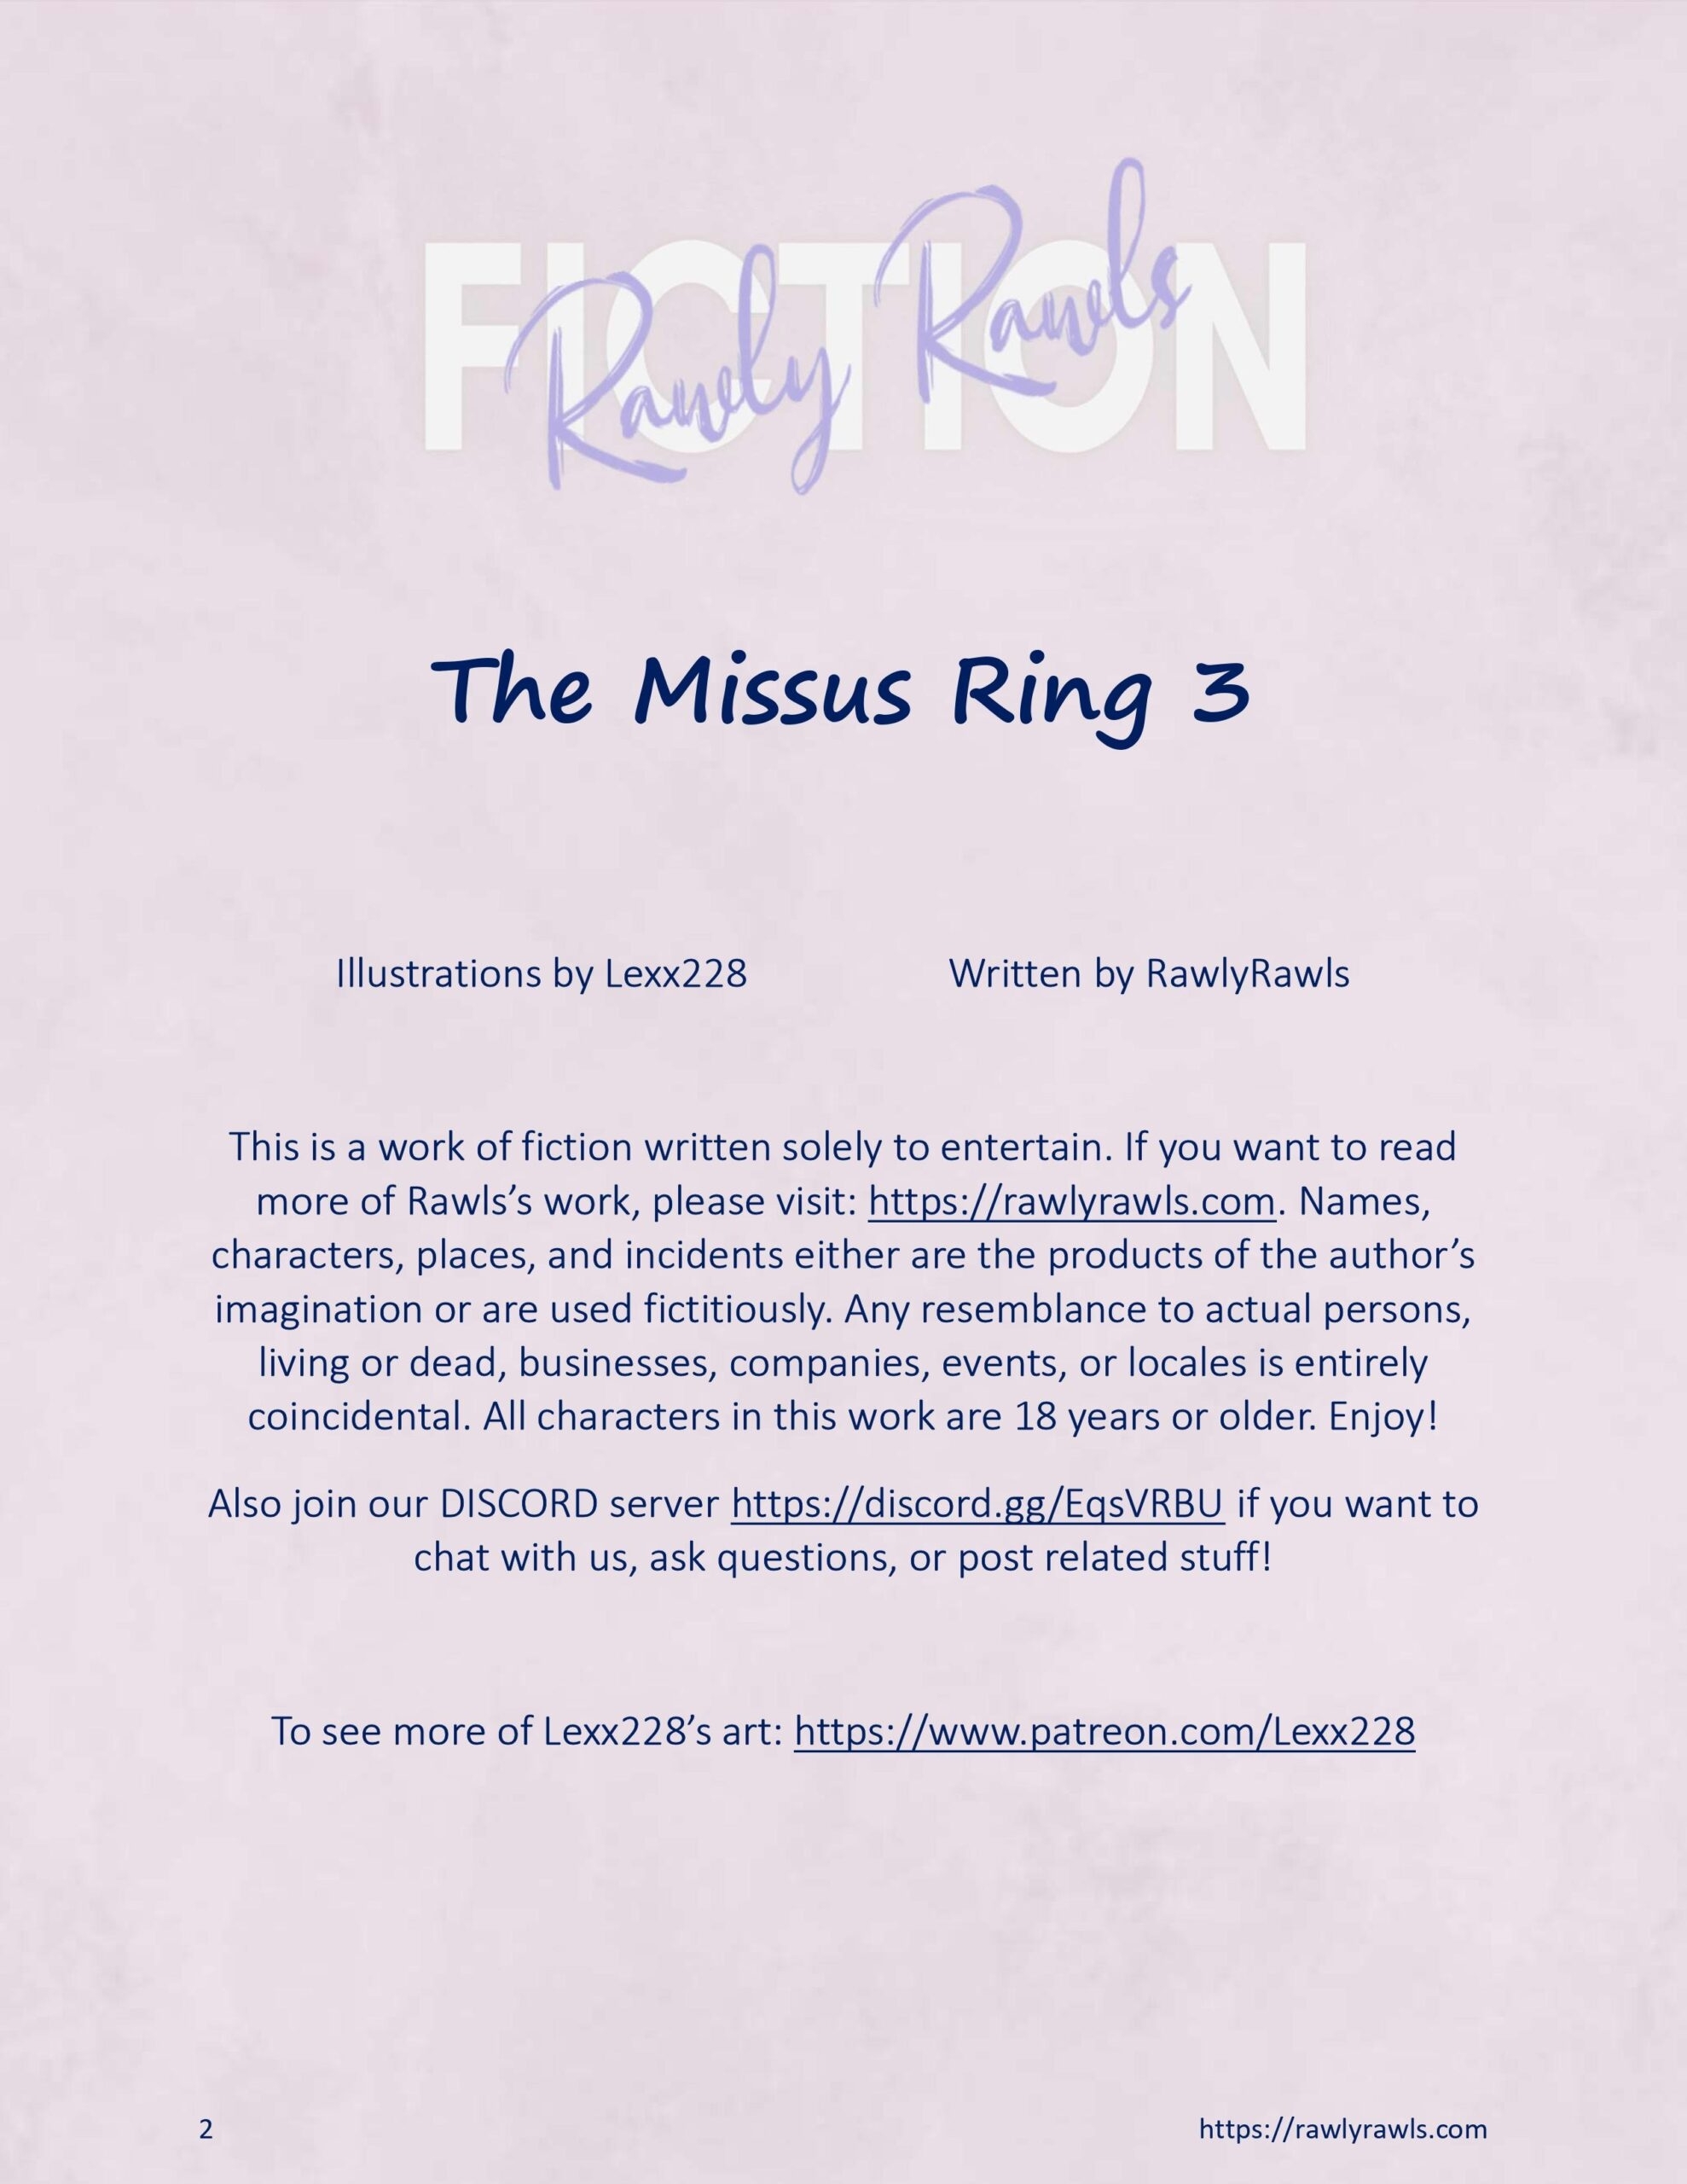 The missus ring 3